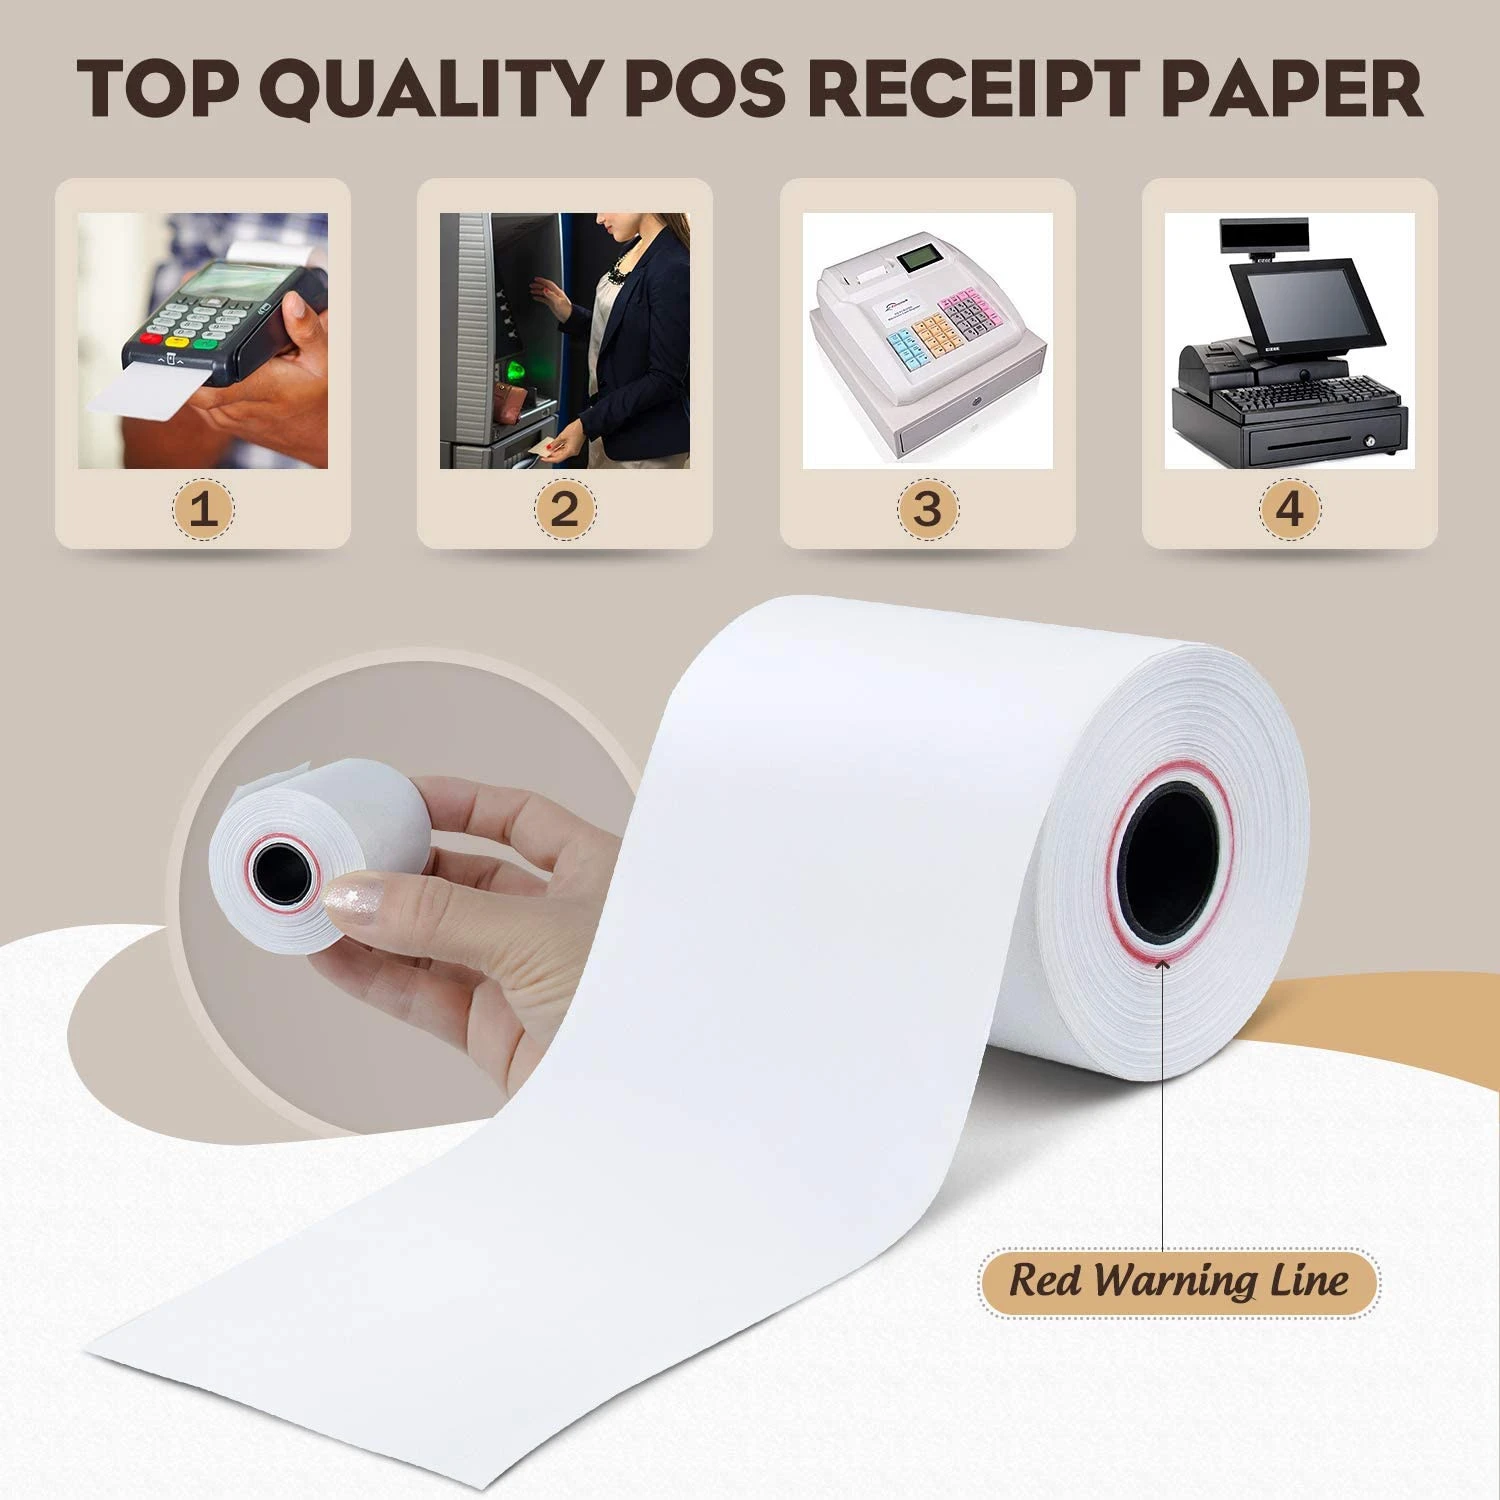 Thermal cashier paper roll for cash registers